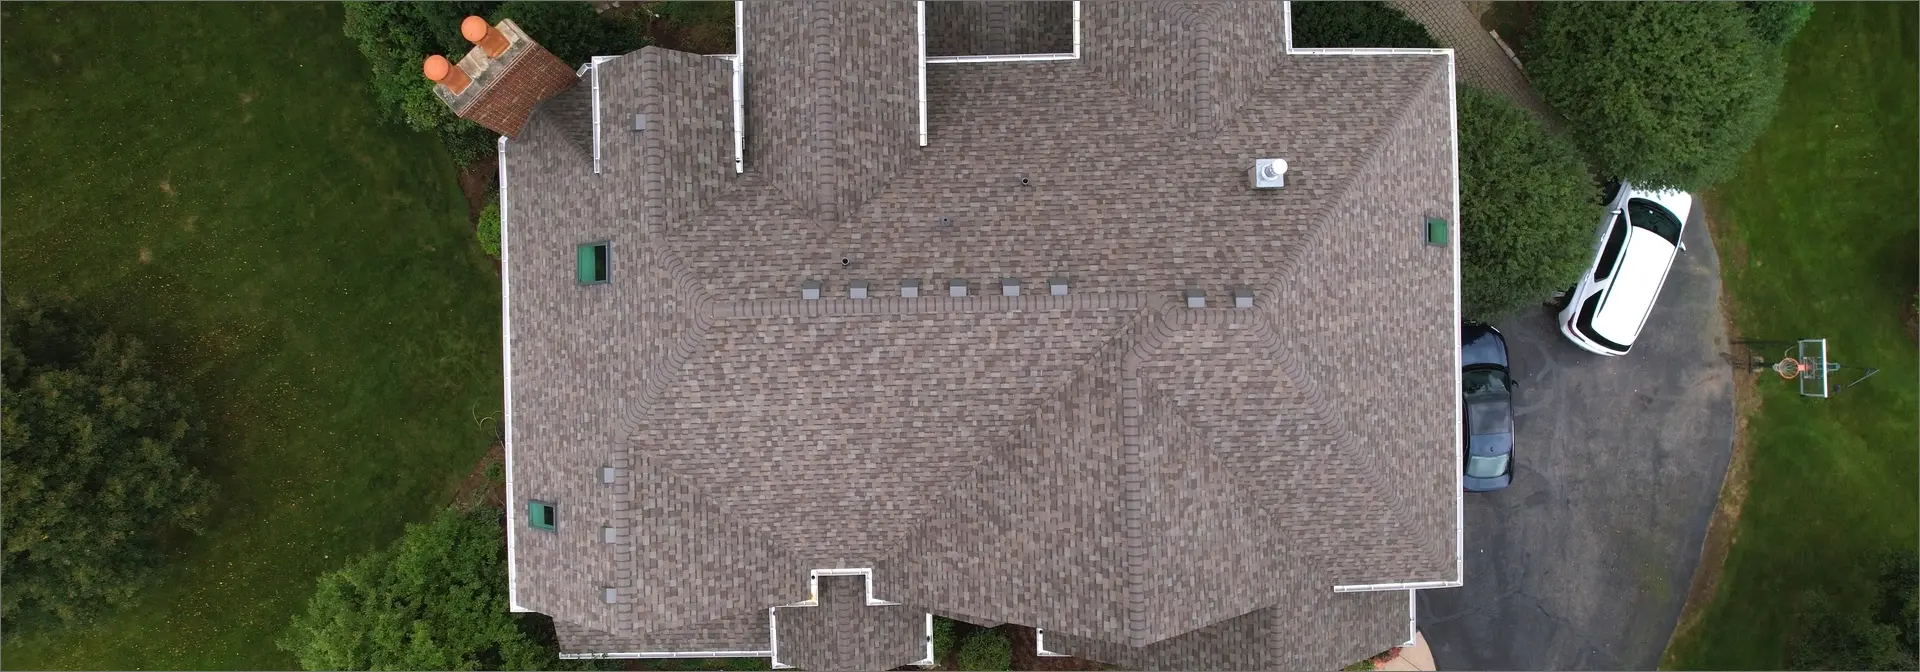 Overhead view of a home with a recently replaced roof by 3JM Exteriors. Right side of the home has 2 cars parked in driveway near a basketball hoop. 